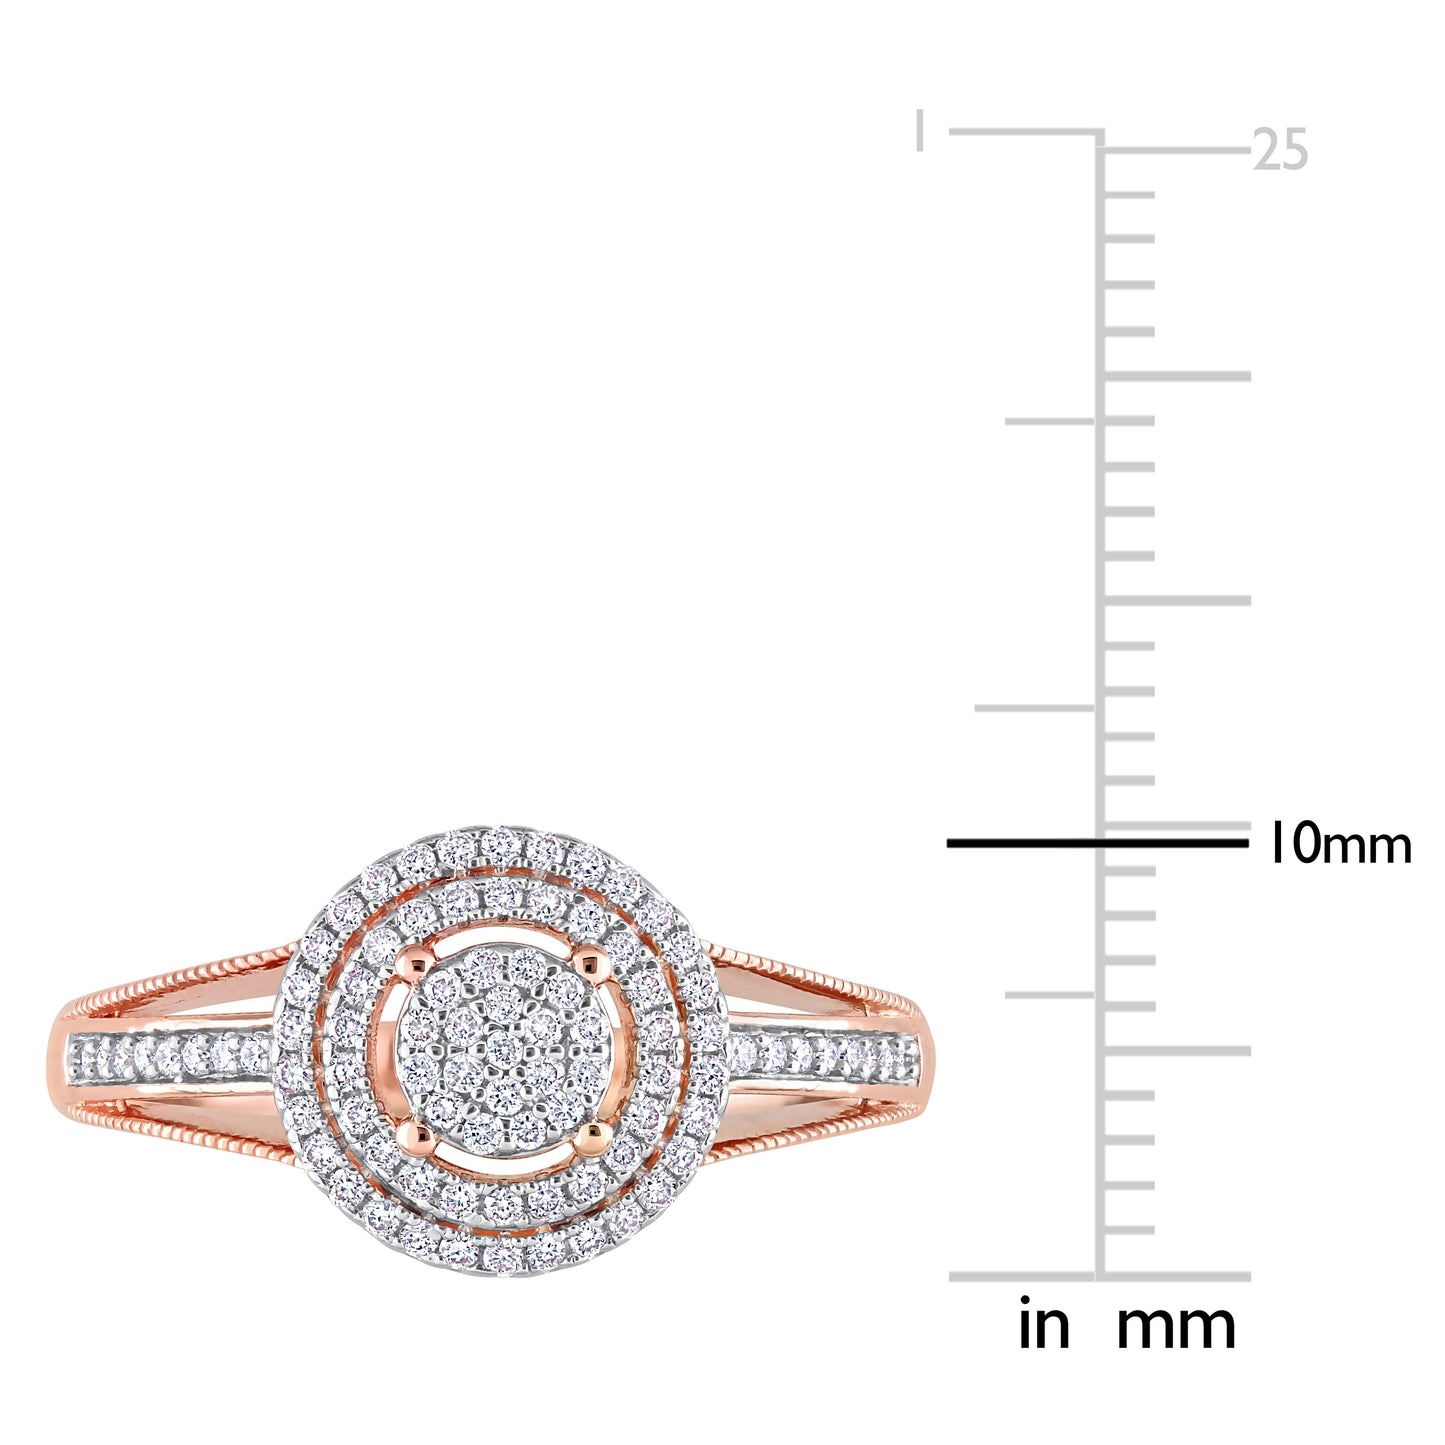 Double Halo Round Cluster Diamond Ring in 14k Rose Gold